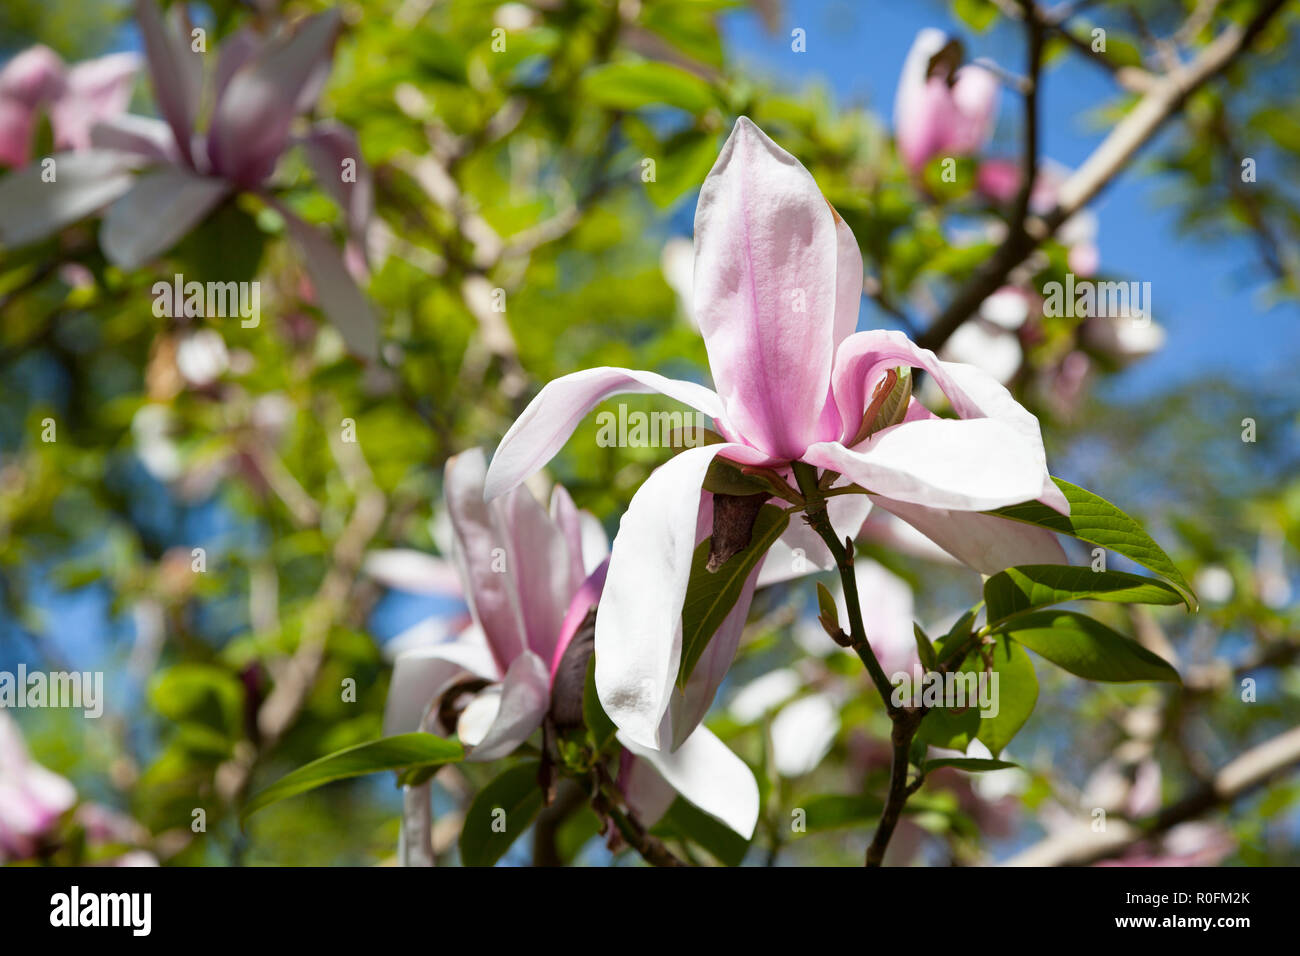 Spring flowering Magnolia variety Starwars with pink flowers. Stock Photo